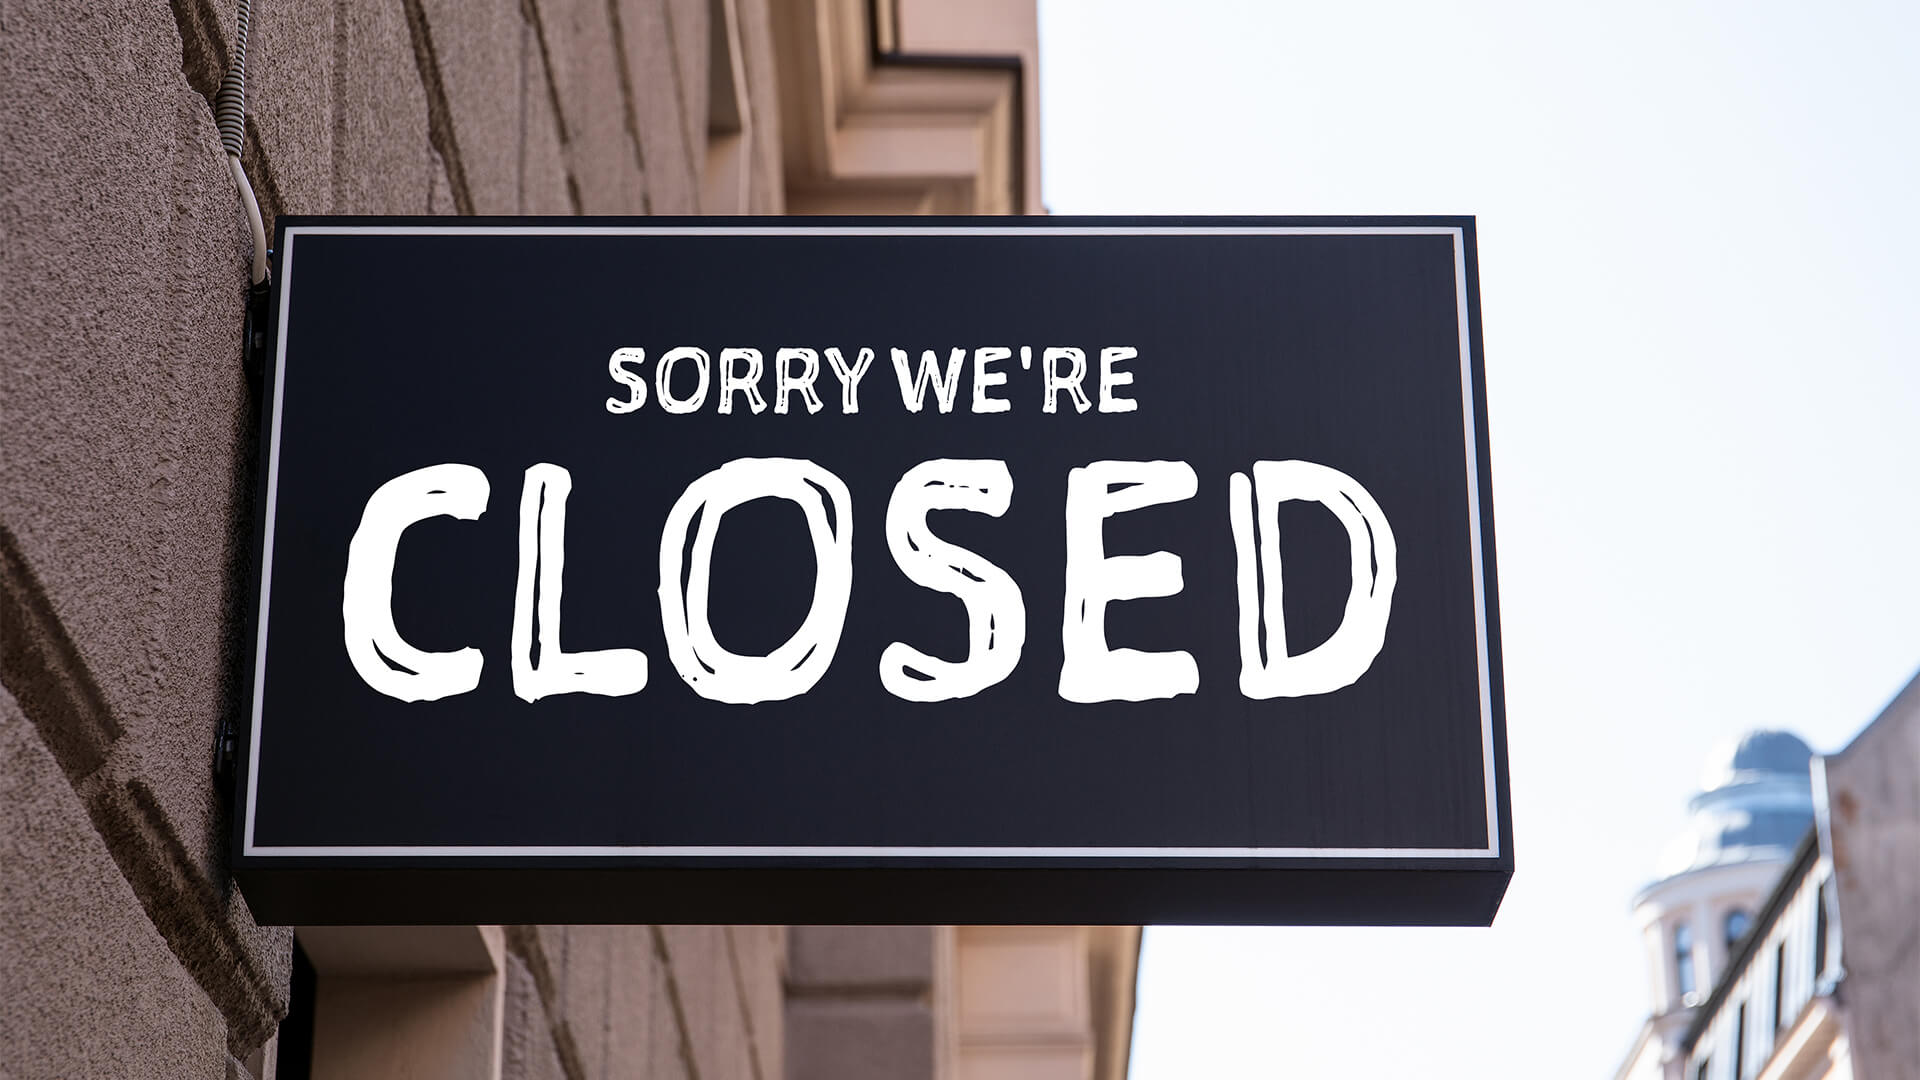 Sign outside a retail business that says "sorry we're closed"